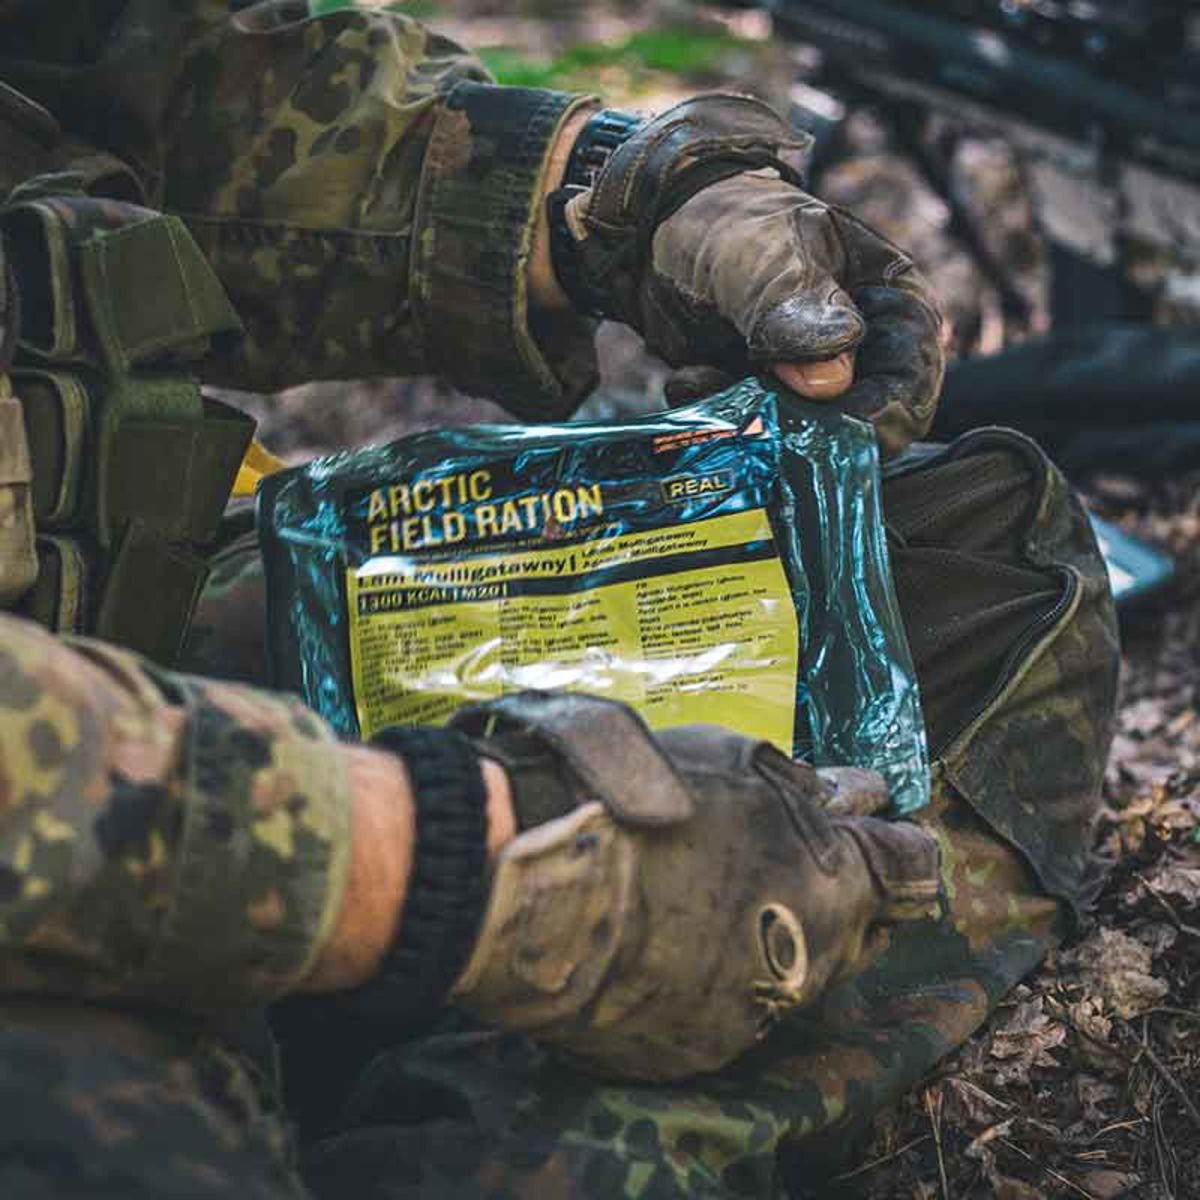 Combat rations of France's Special Forces : r/pics